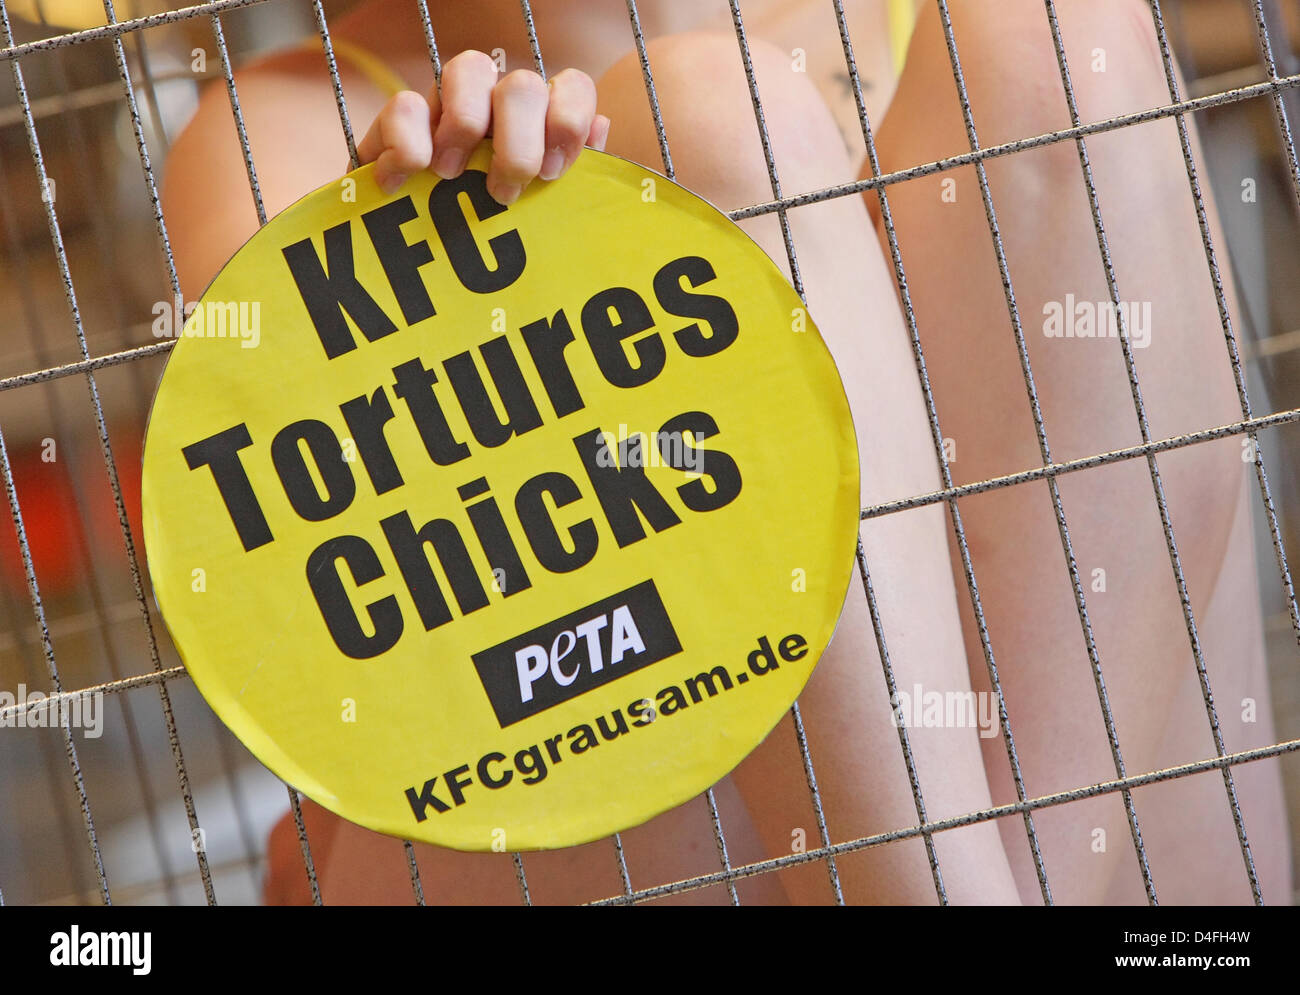 Animal rights activists of PETA sit in a cage holding signs reading 'KFC tortures chicks' across a branch of fast food chain Kentucky Fried Chicken (KFC) in Frankfurt Main, Germany, 06 August 2008. The activists aim to call attention to the fate of some 800 million chicks handled by KFC. Photo: UWE ANSPACH Stock Photo